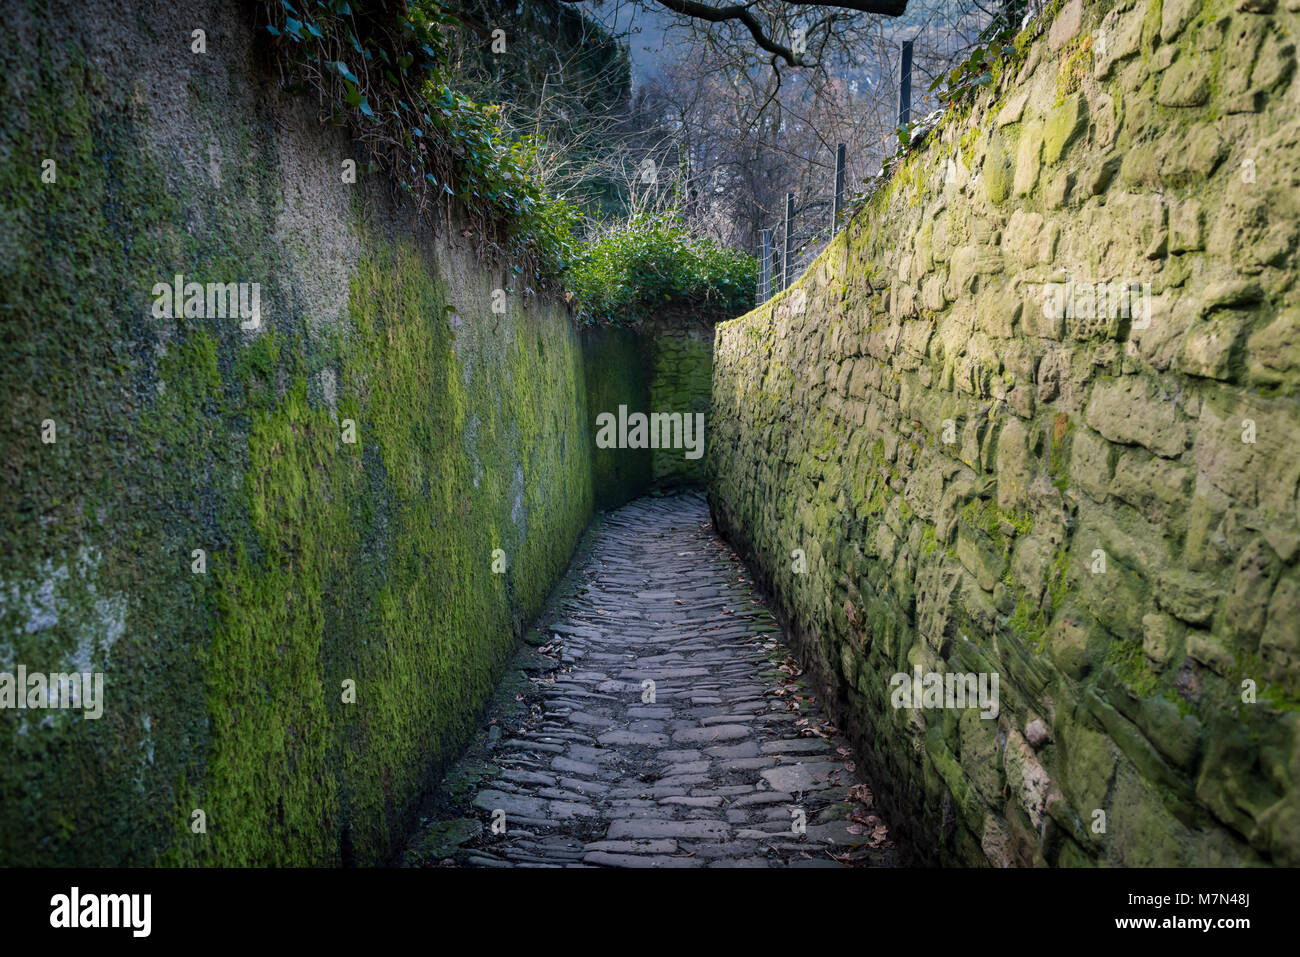 Unusual stone road in the park. Colorful passage in recreation area. Green corridor with plants and moss Stock Photo